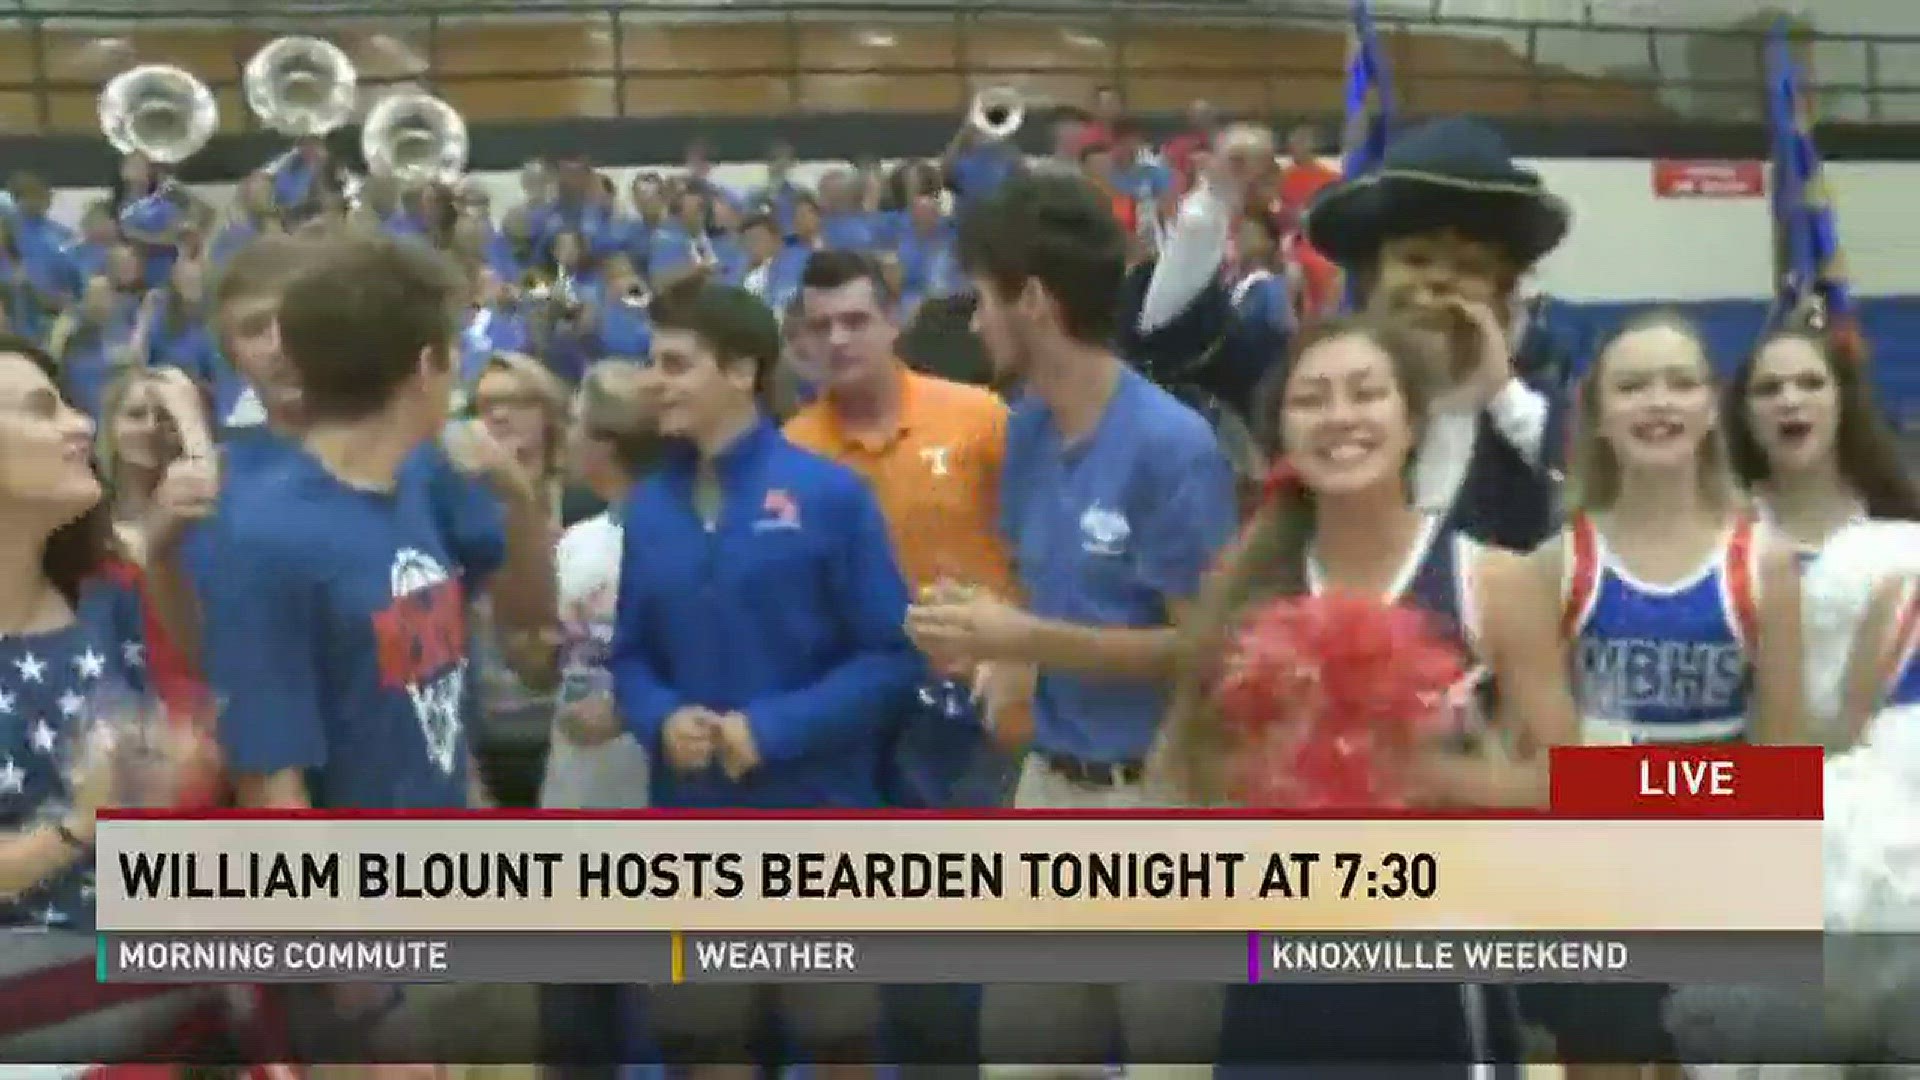 In Friday's PrepXtra Game of the Week, William Blount will take on Bearden High School.